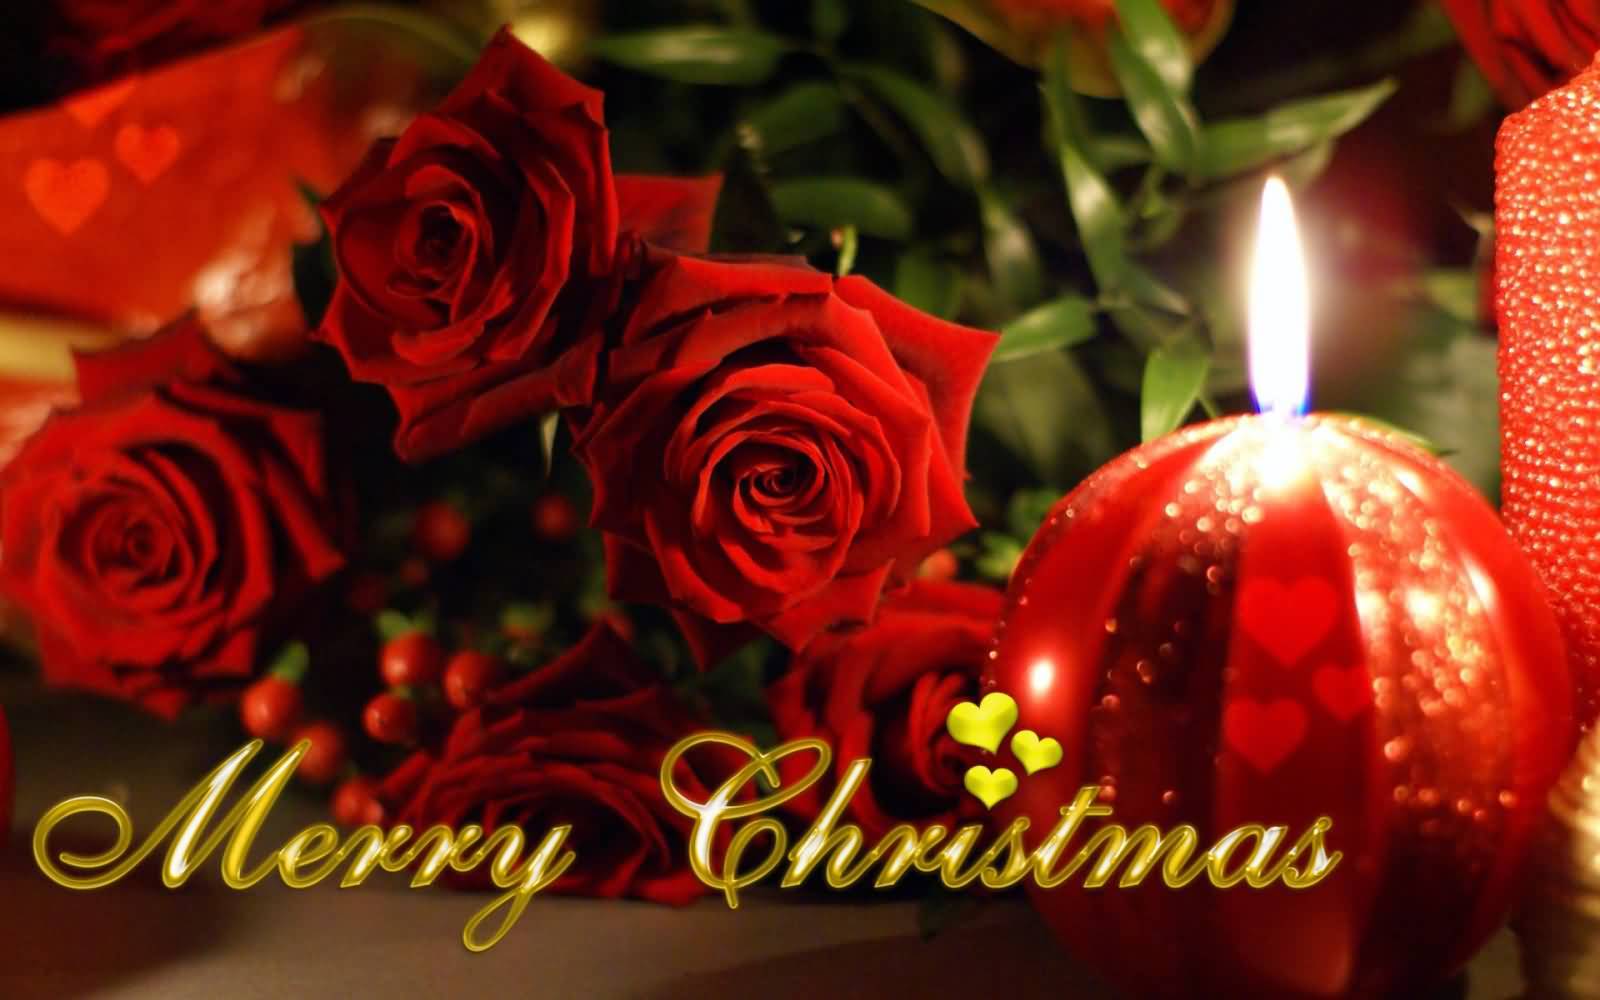 Merry Christmas Candle And Rose Buds Picture